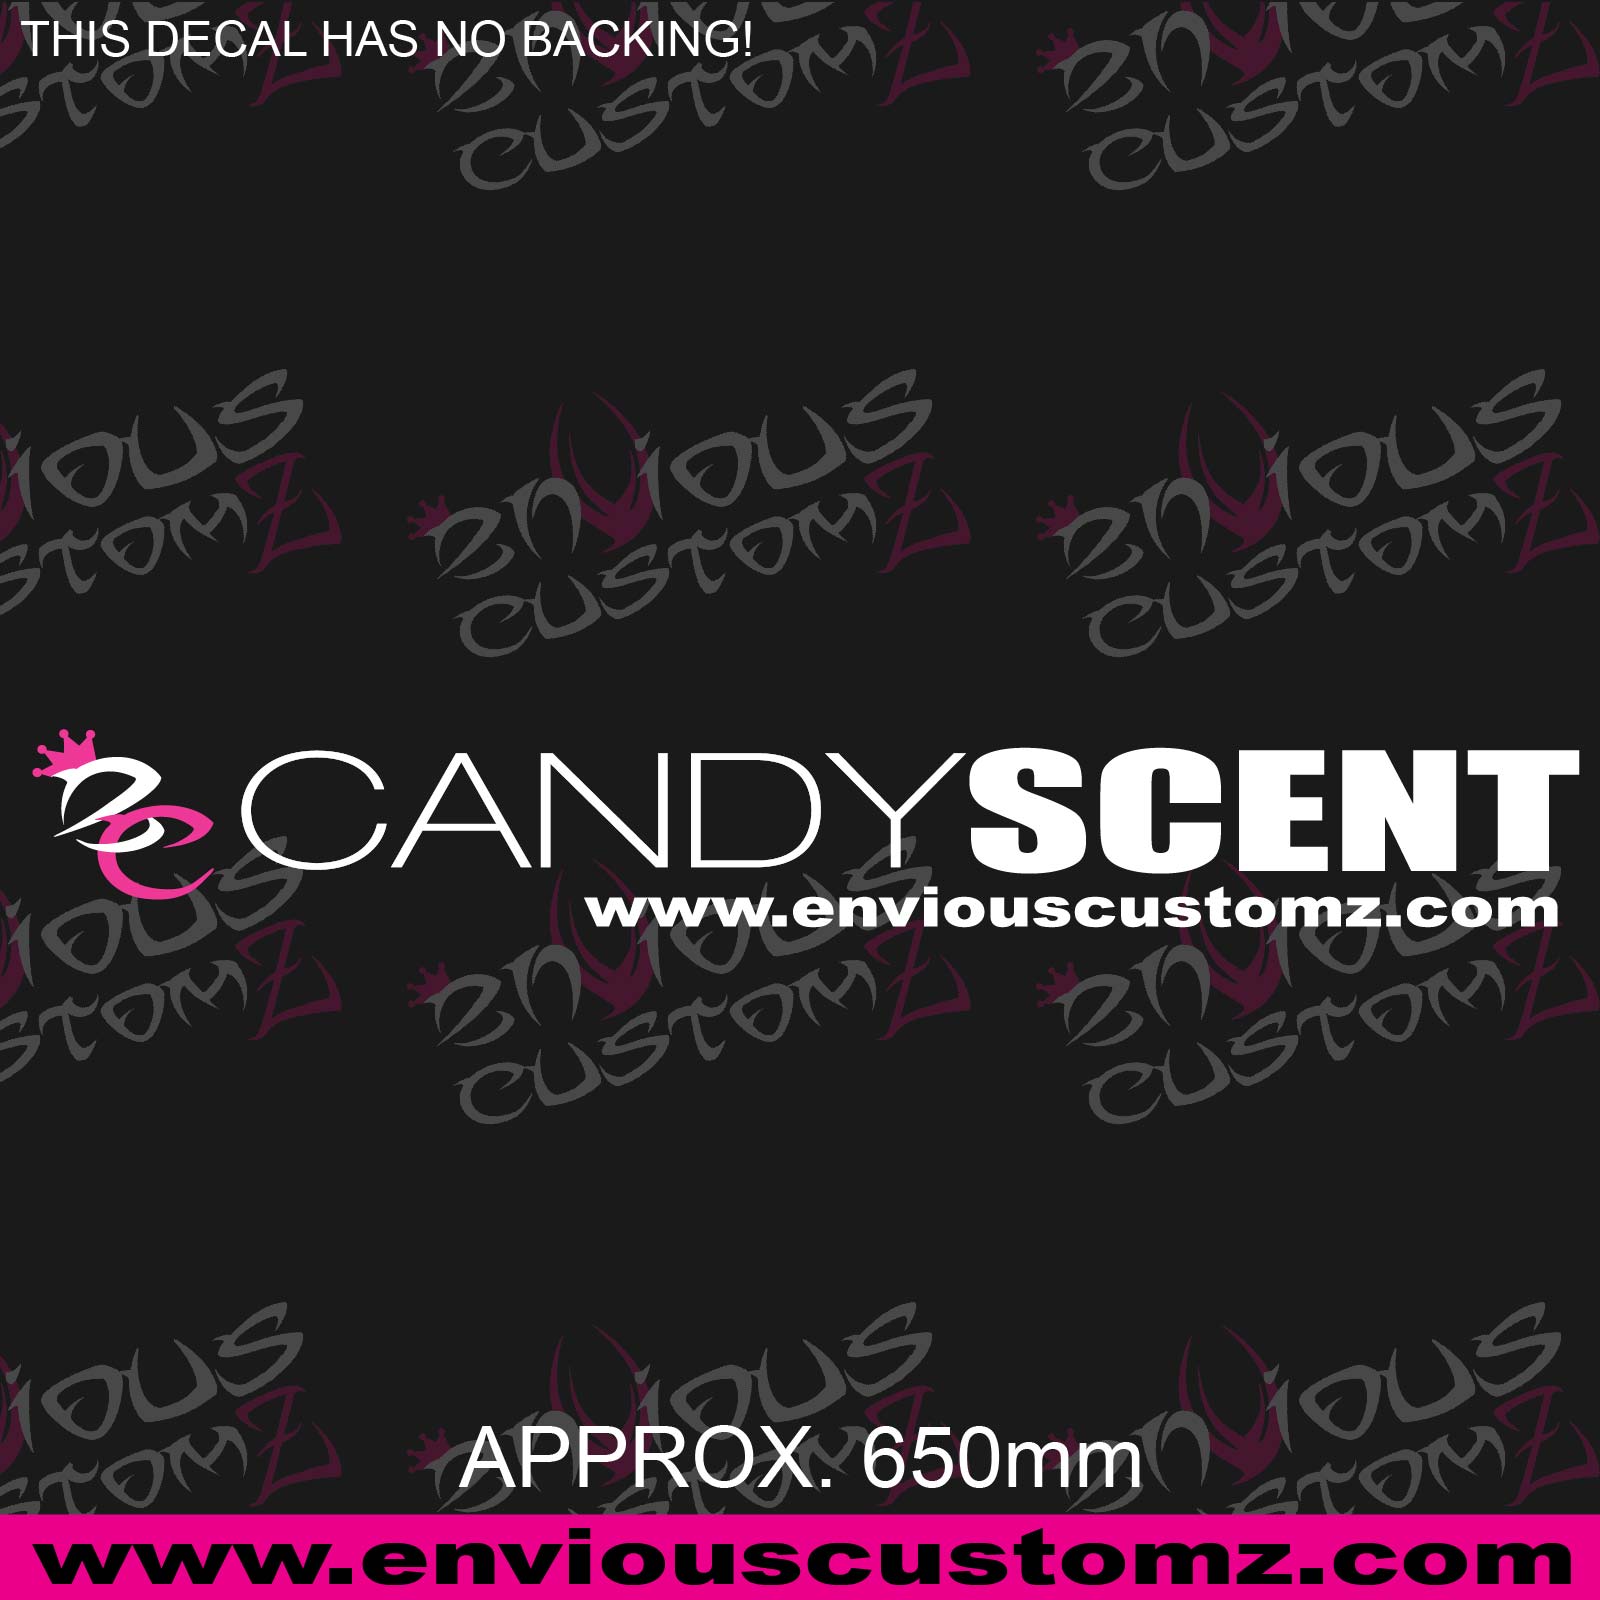 EC Candy Scent Decal - CANDY SCENT - ENVIOUS CUSTOMZ 